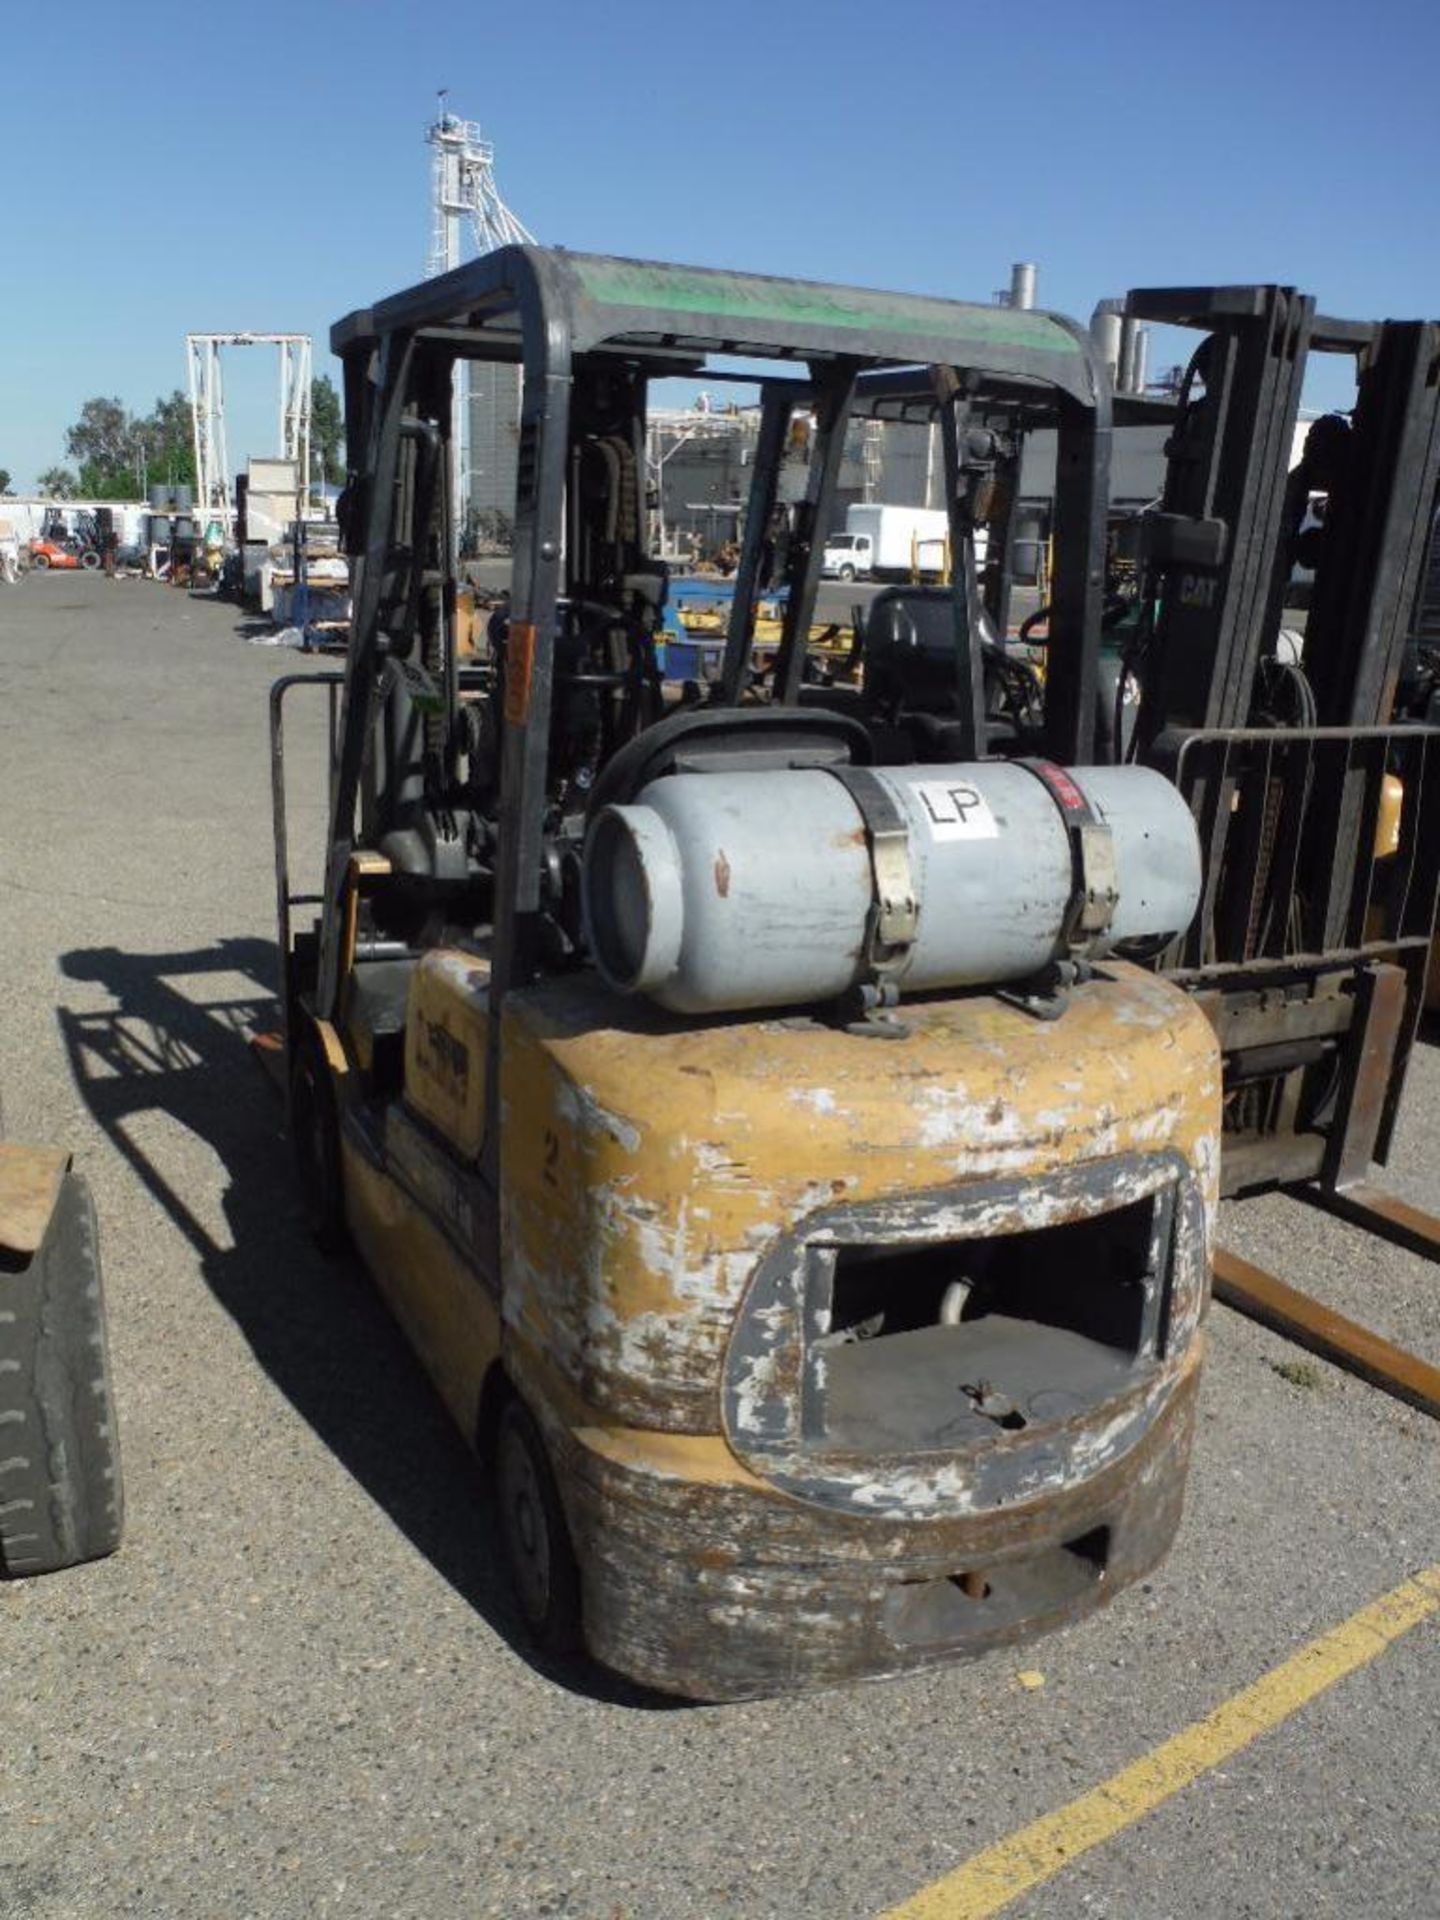 Caterpillar lp gas forklift, Model GC30K, SN AT83D00560, 4360 lb. capacity, 187 in. lift height, 3 - Image 3 of 7